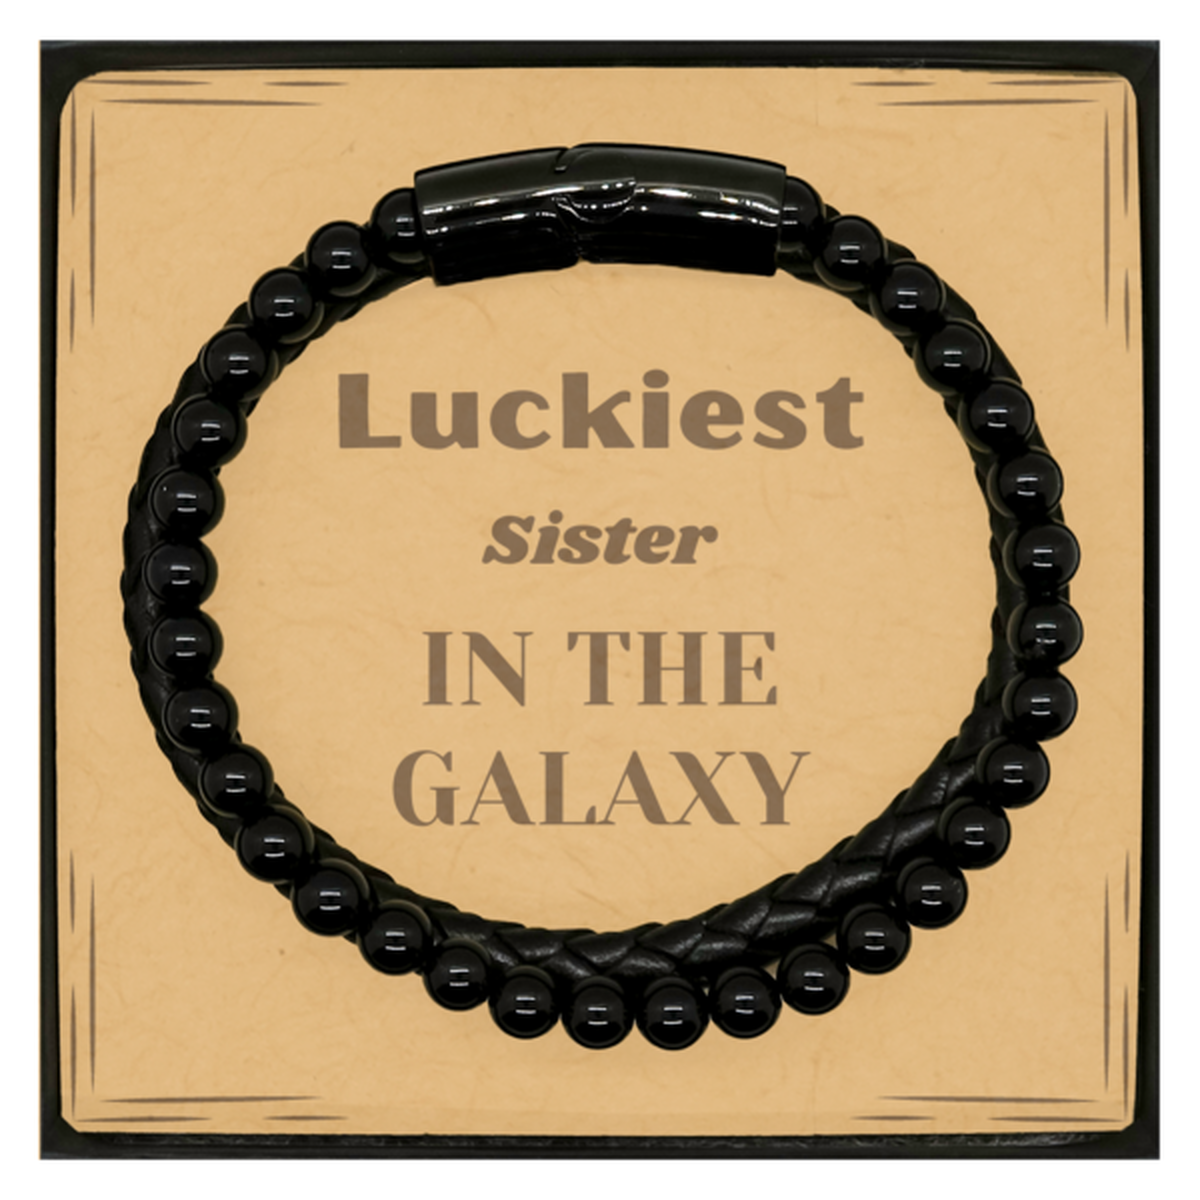 Luckiest Sister in the Galaxy, To My Sister Message Card Gifts, Christmas Sister Stone Leather Bracelets Gifts, X-mas Birthday Unique Gifts For Sister Men Women